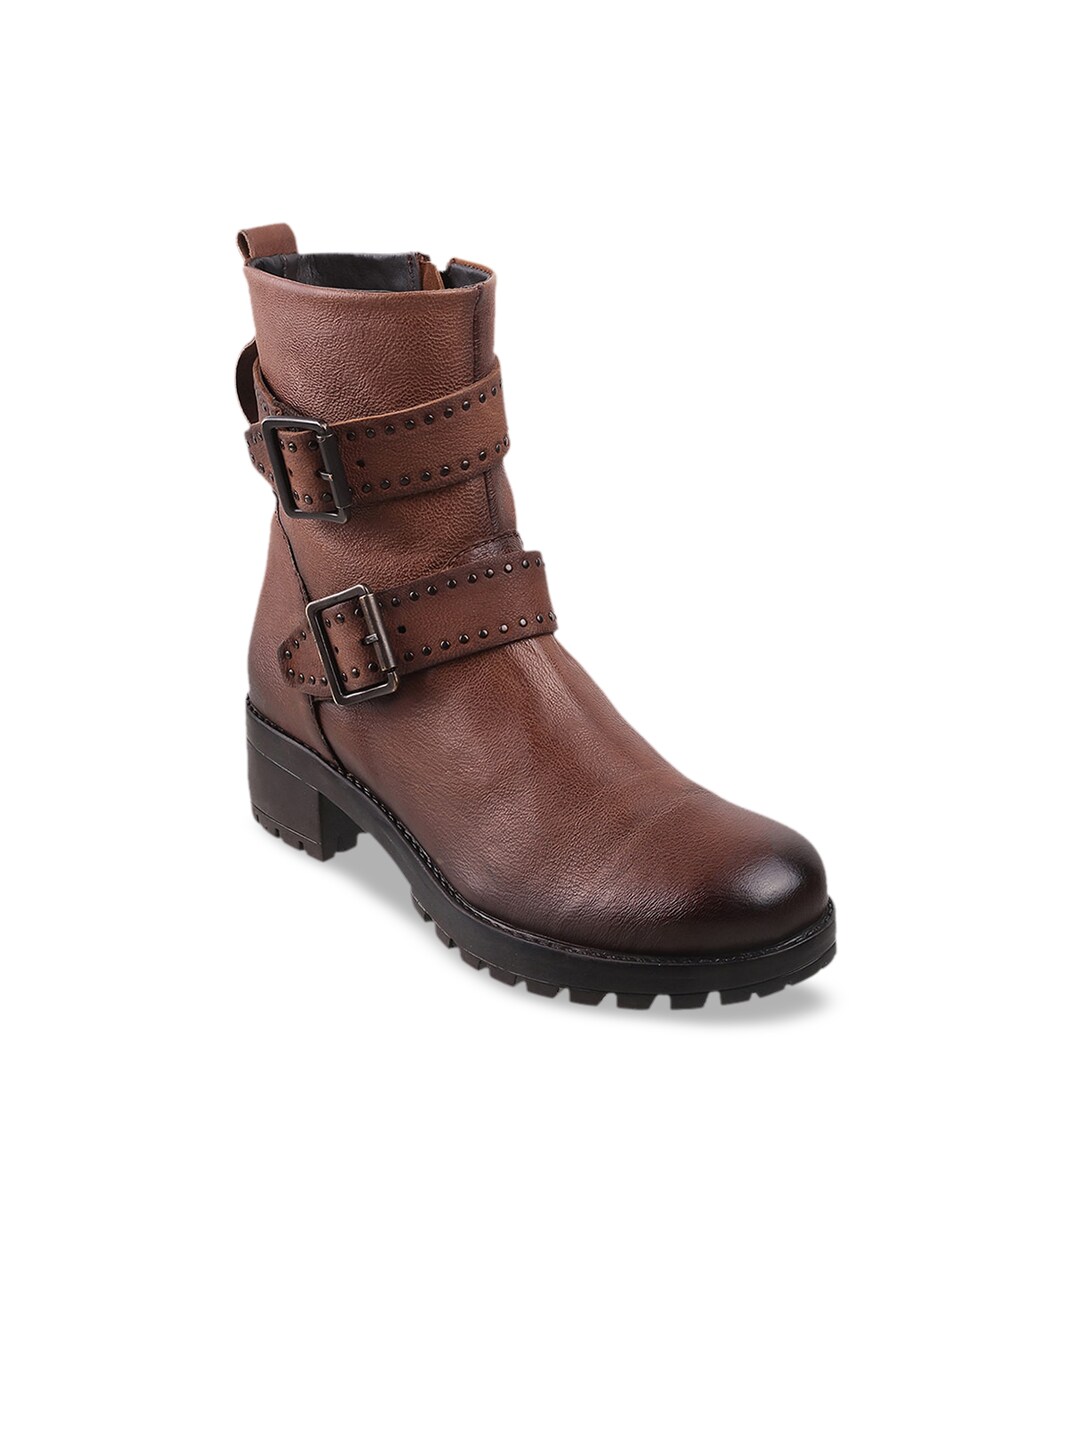 Metro Tan Brown Block Heeled Boots with Buckles Price in India